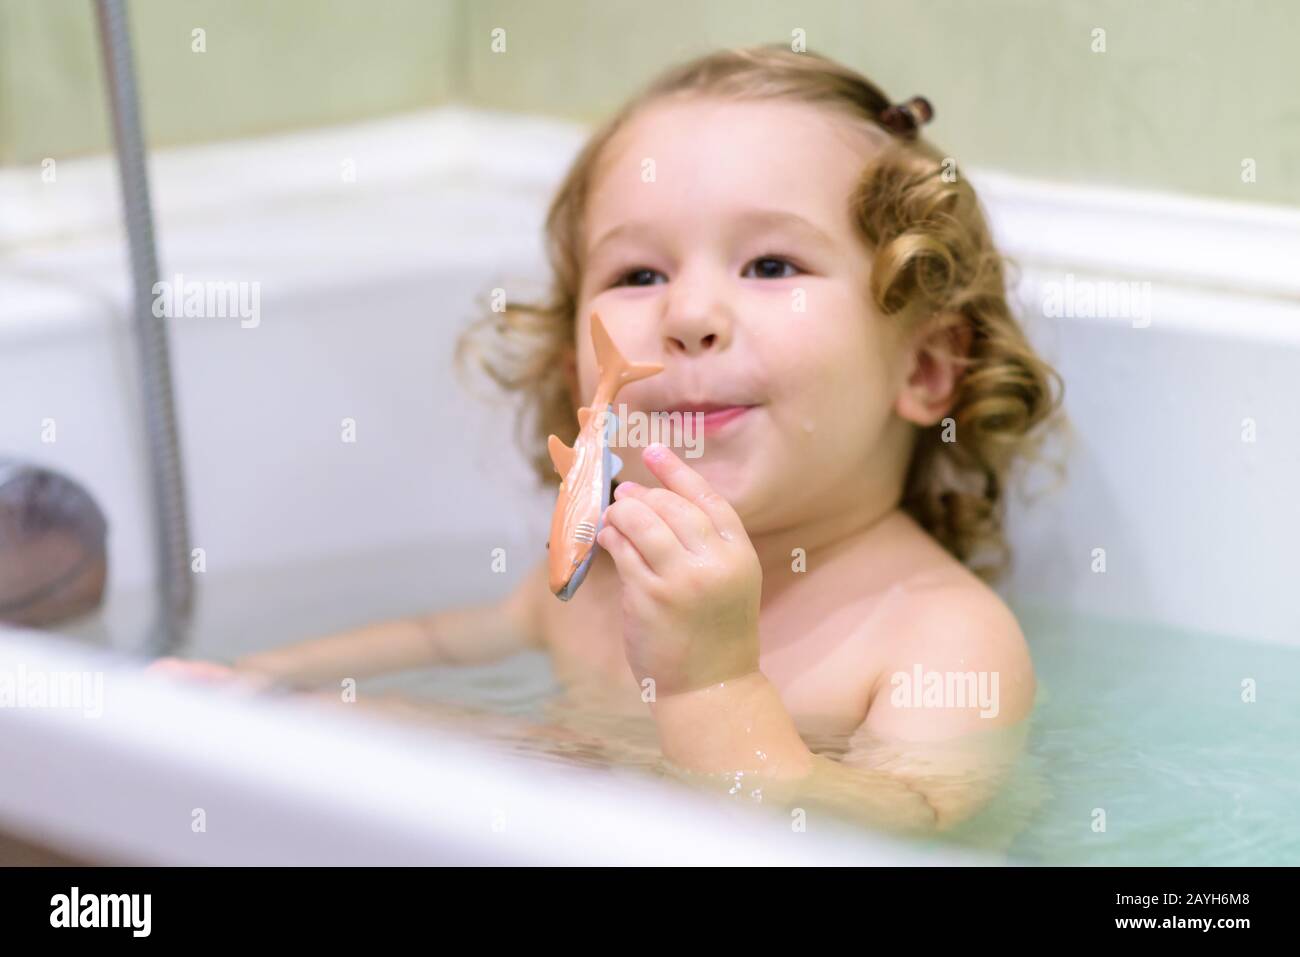 Cheerful baby girl plays in a bath. Two-year-old child holds a toy fish and smiles in a bathtub. Adorable toddler while bathing in the bathroom. Wash Stock Photo